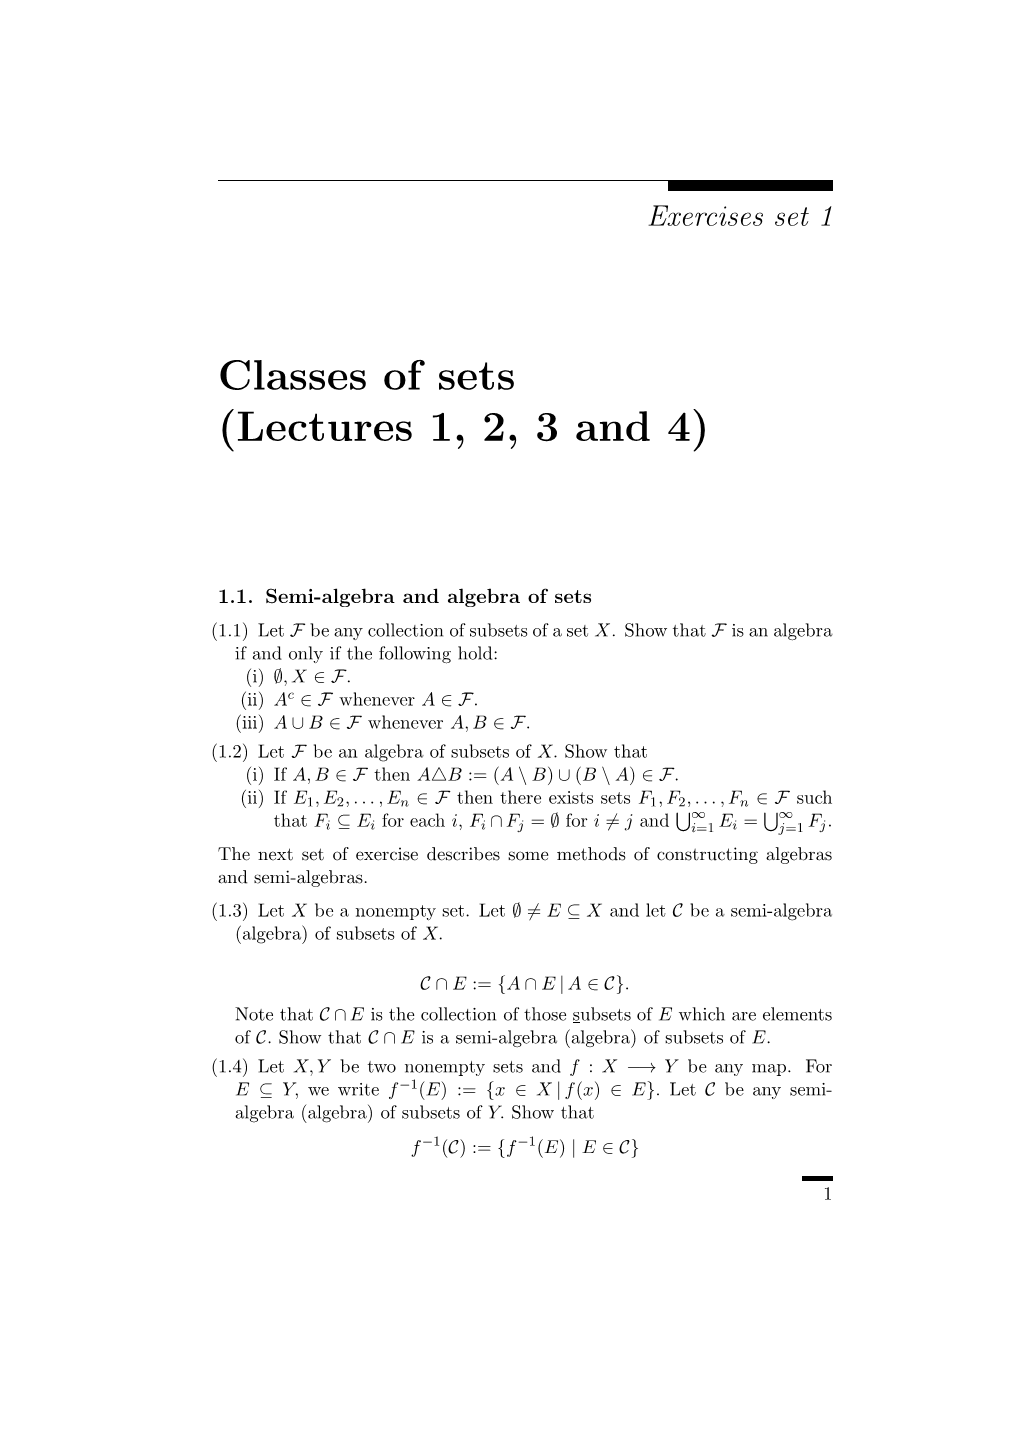 Classes of Sets (Lectures 1, 2, 3 and 4)